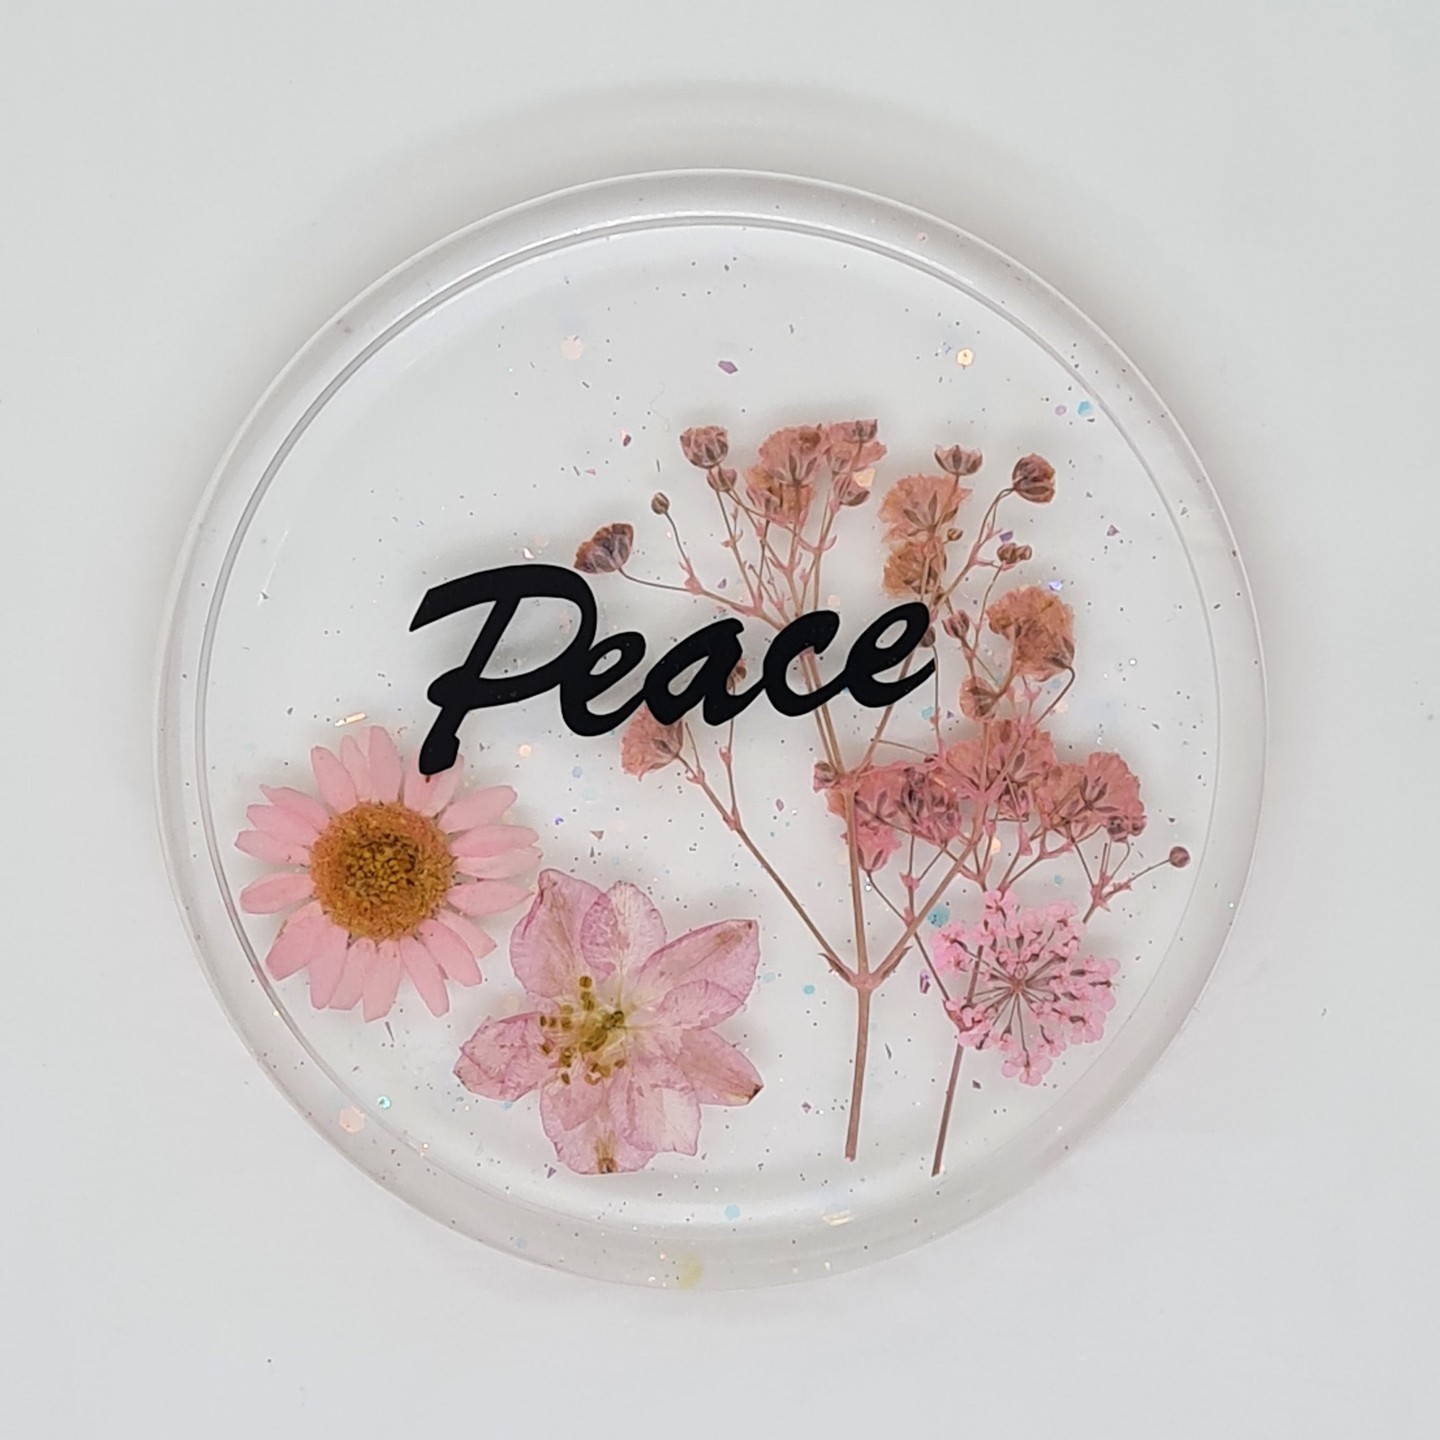 Peace   Real Pressed Flowers & Leaves Resin Coaster with an inspirational word Handmade